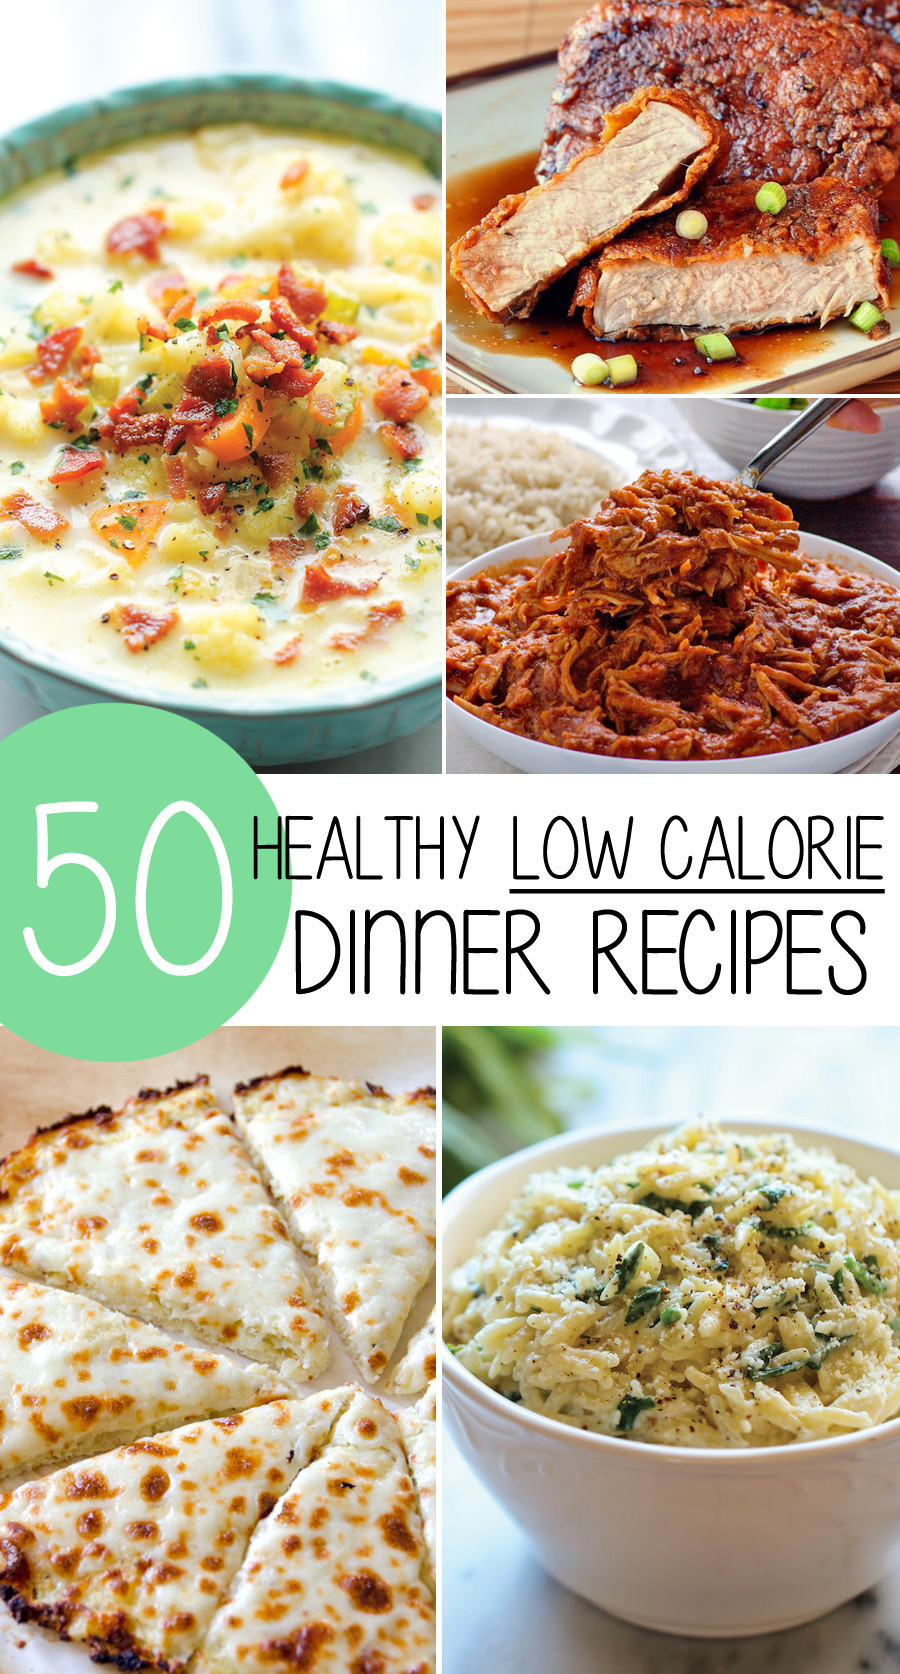 Healthy Meals And Snacks For Weight Loss
 50 Healthy Low Calorie Weight Loss Dinner Recipes